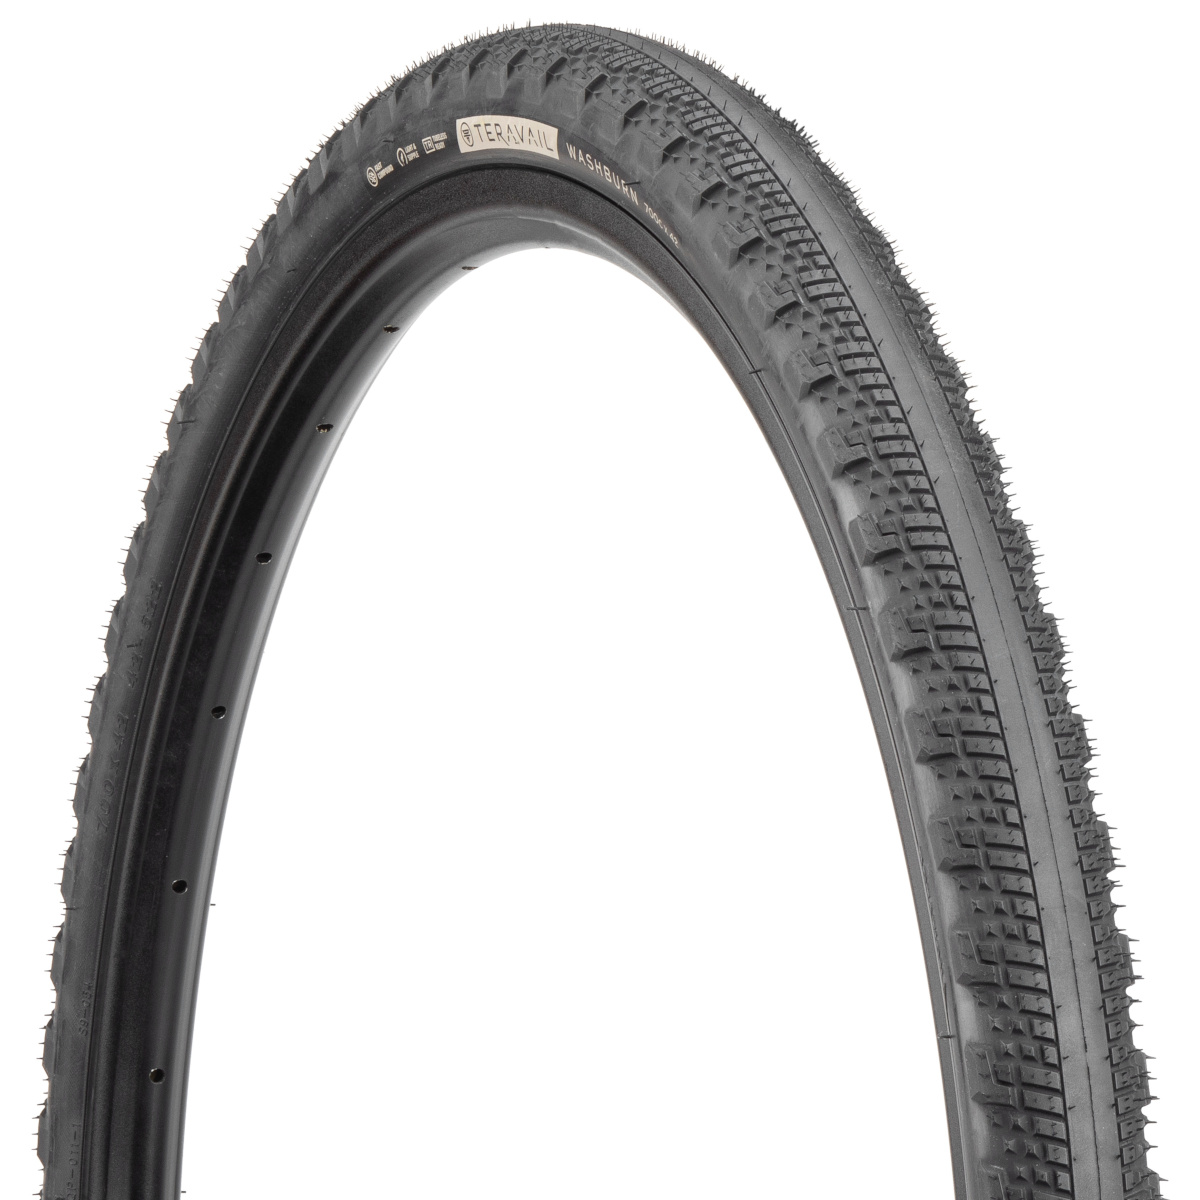 Picture of Teravail Washburn Folding Tire - Light and Supple - 42-622 - black